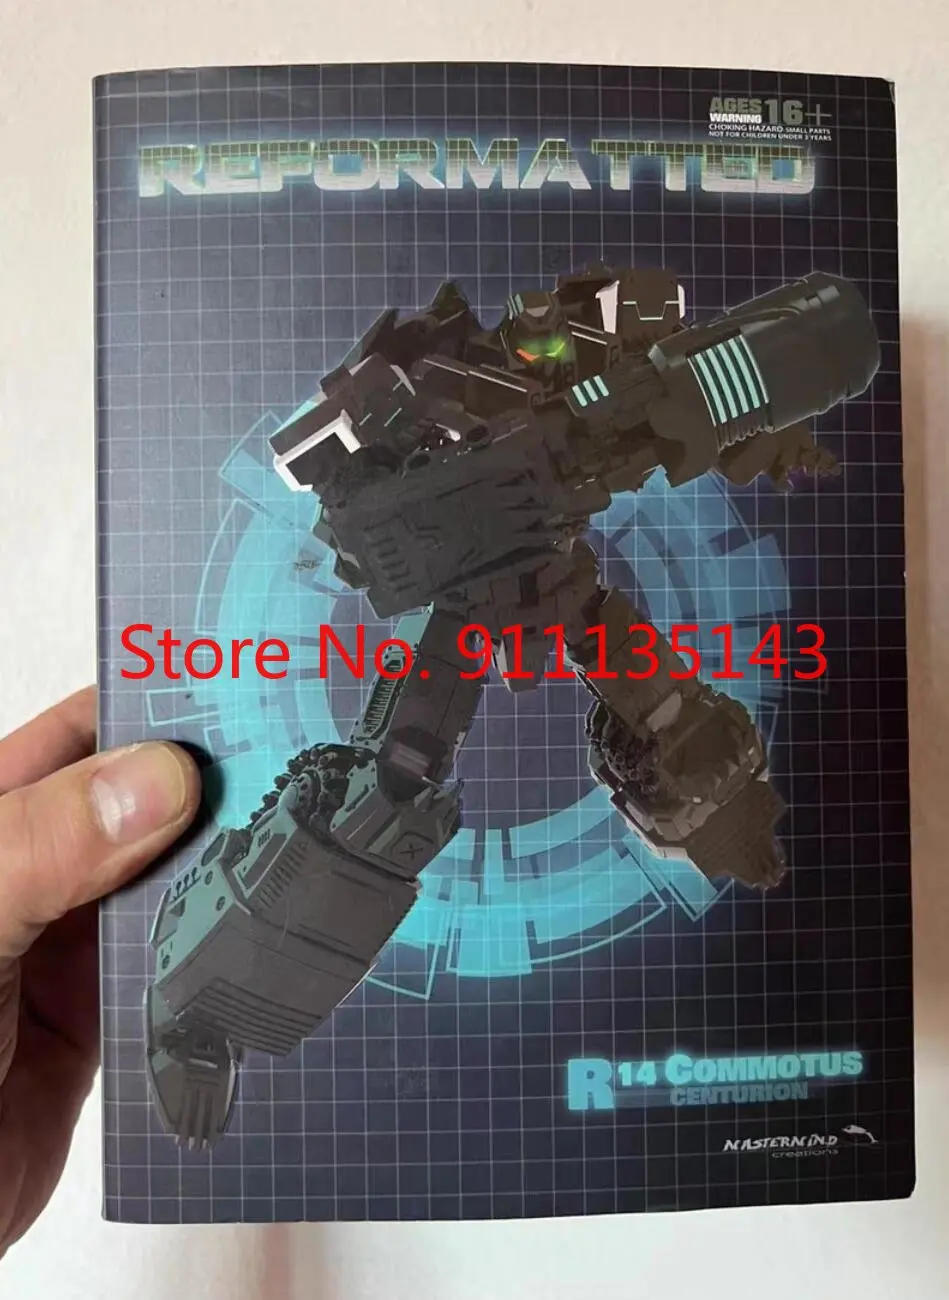 Mmc R14 Turmoil Commotus Limited Edition 3rd Party Transformation Toys Anime Action Figure Toy Deformed Model Robot